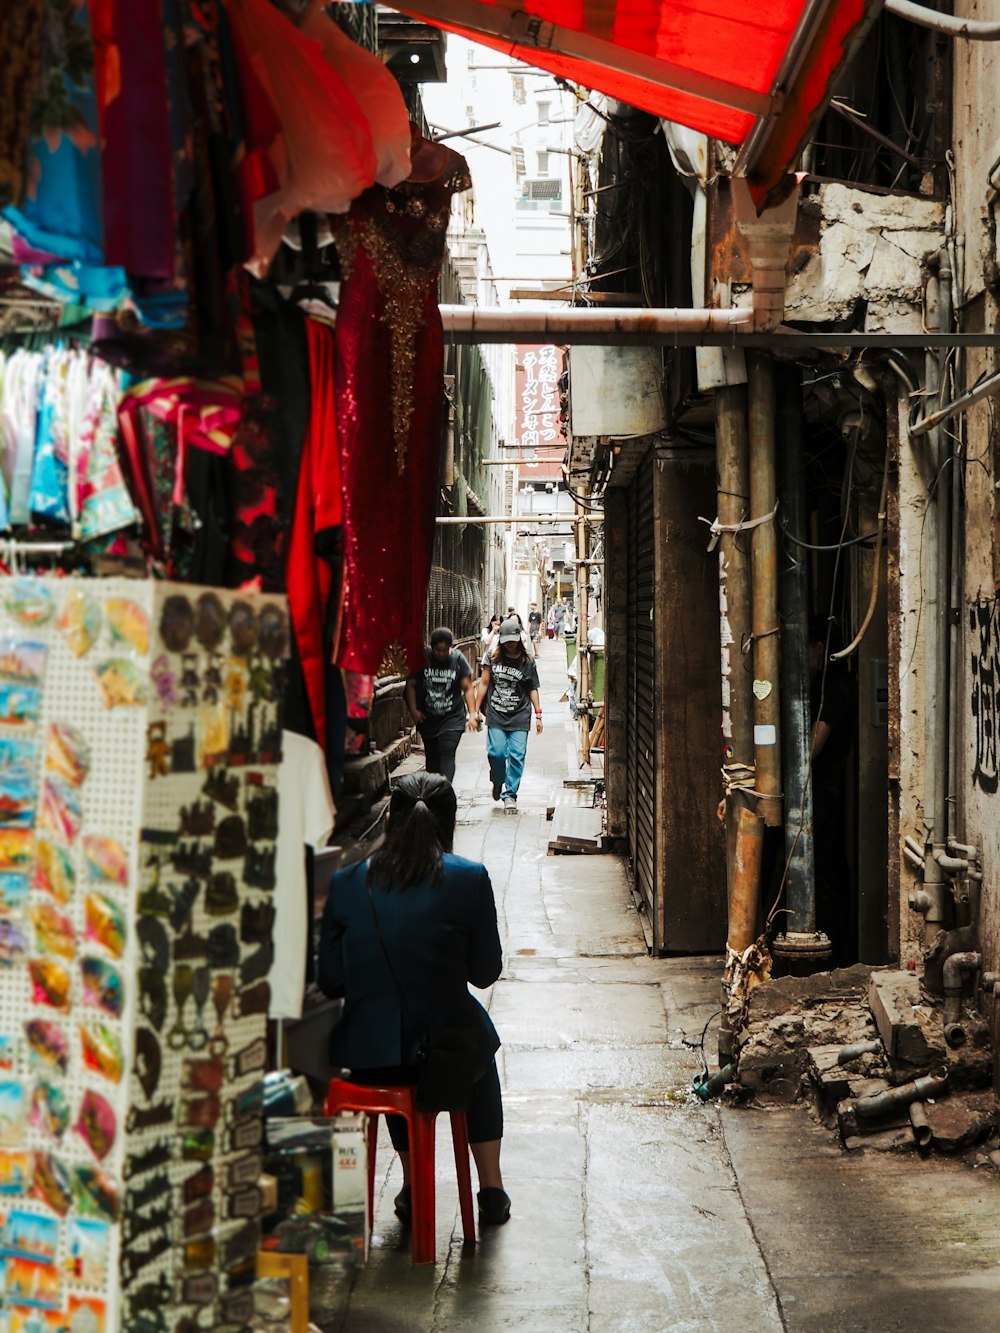 a woman sitting on a chair in a narrow alleyway